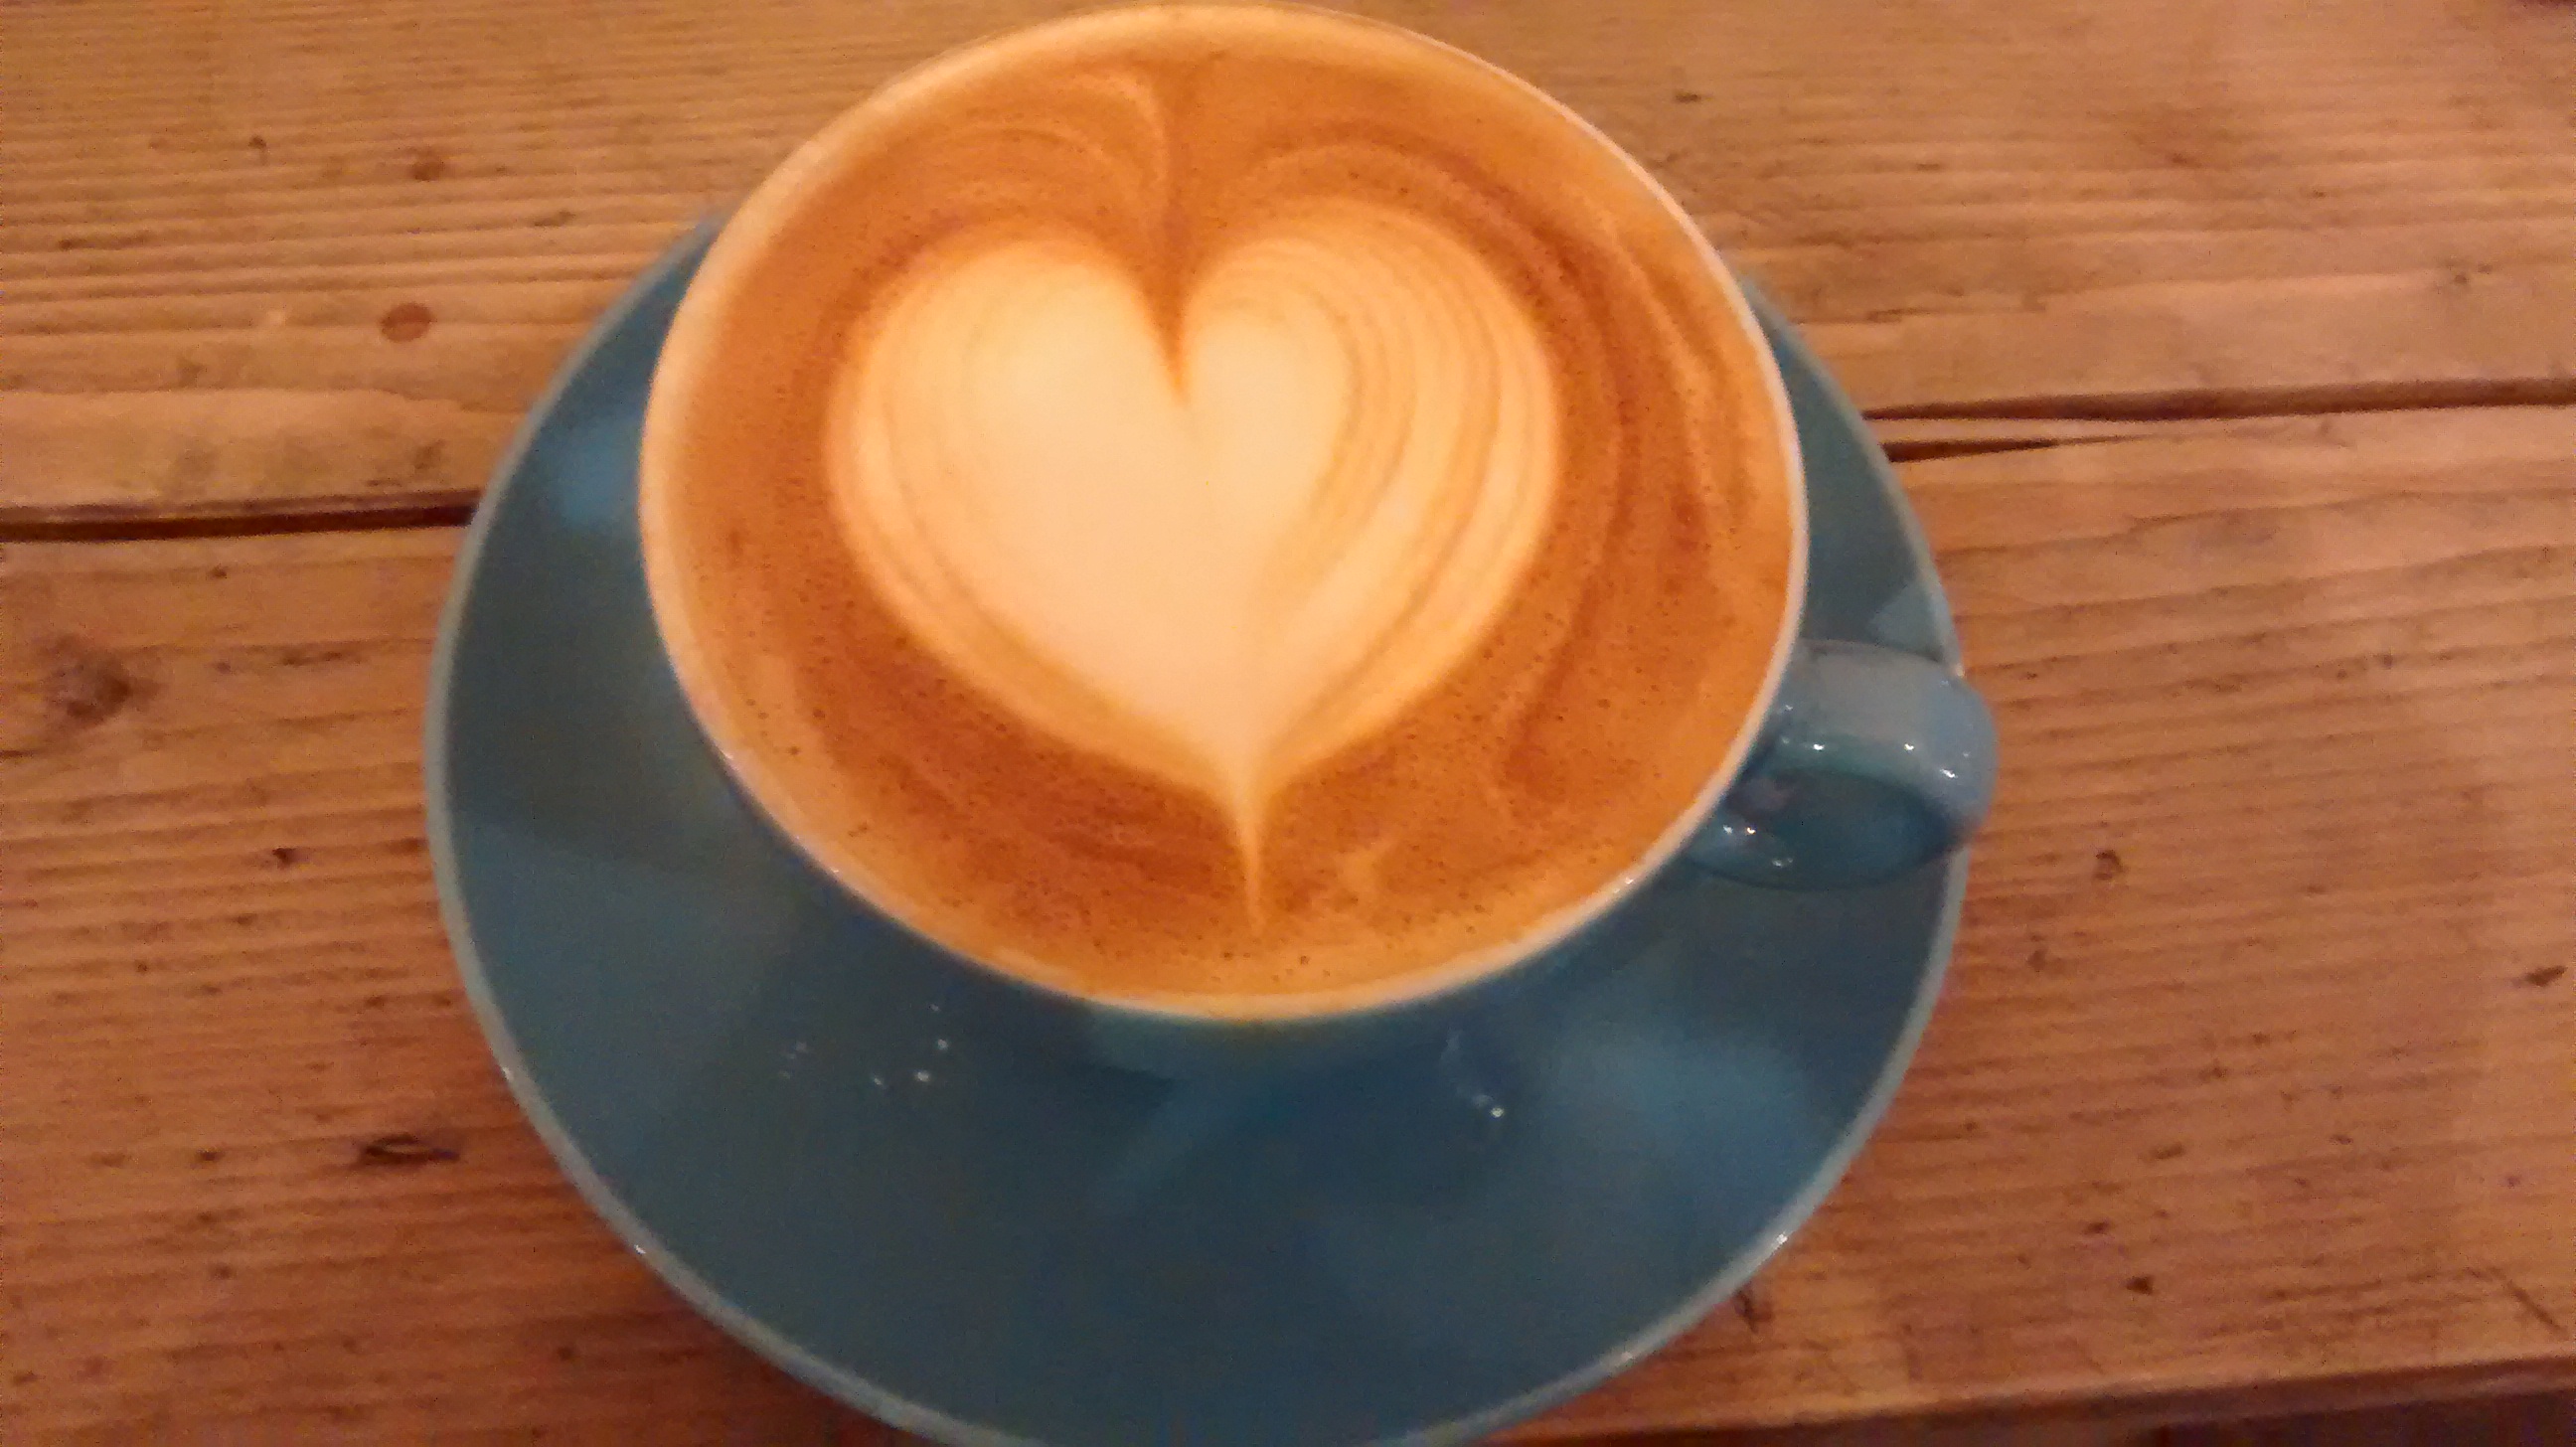 Kahaila Cafe, Brick Lane: Supporting Local Community Projects